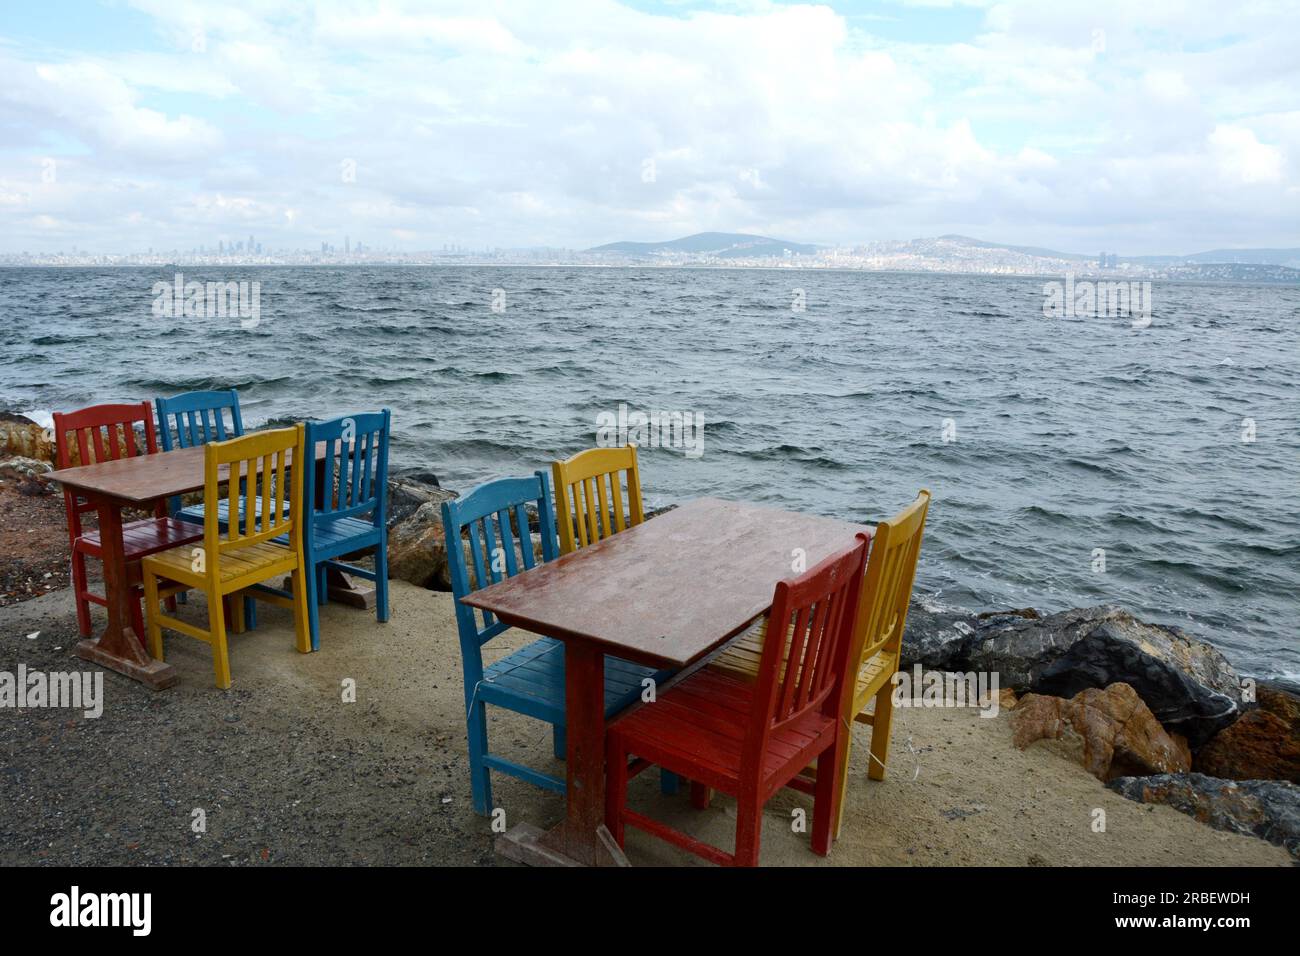 Tables and chairs at a seaside cafe on the island of Burgazada, in the Princes' Islands chain (Adalar), in the Sea of Marmara, Turkey, Turkiye. Stock Photo